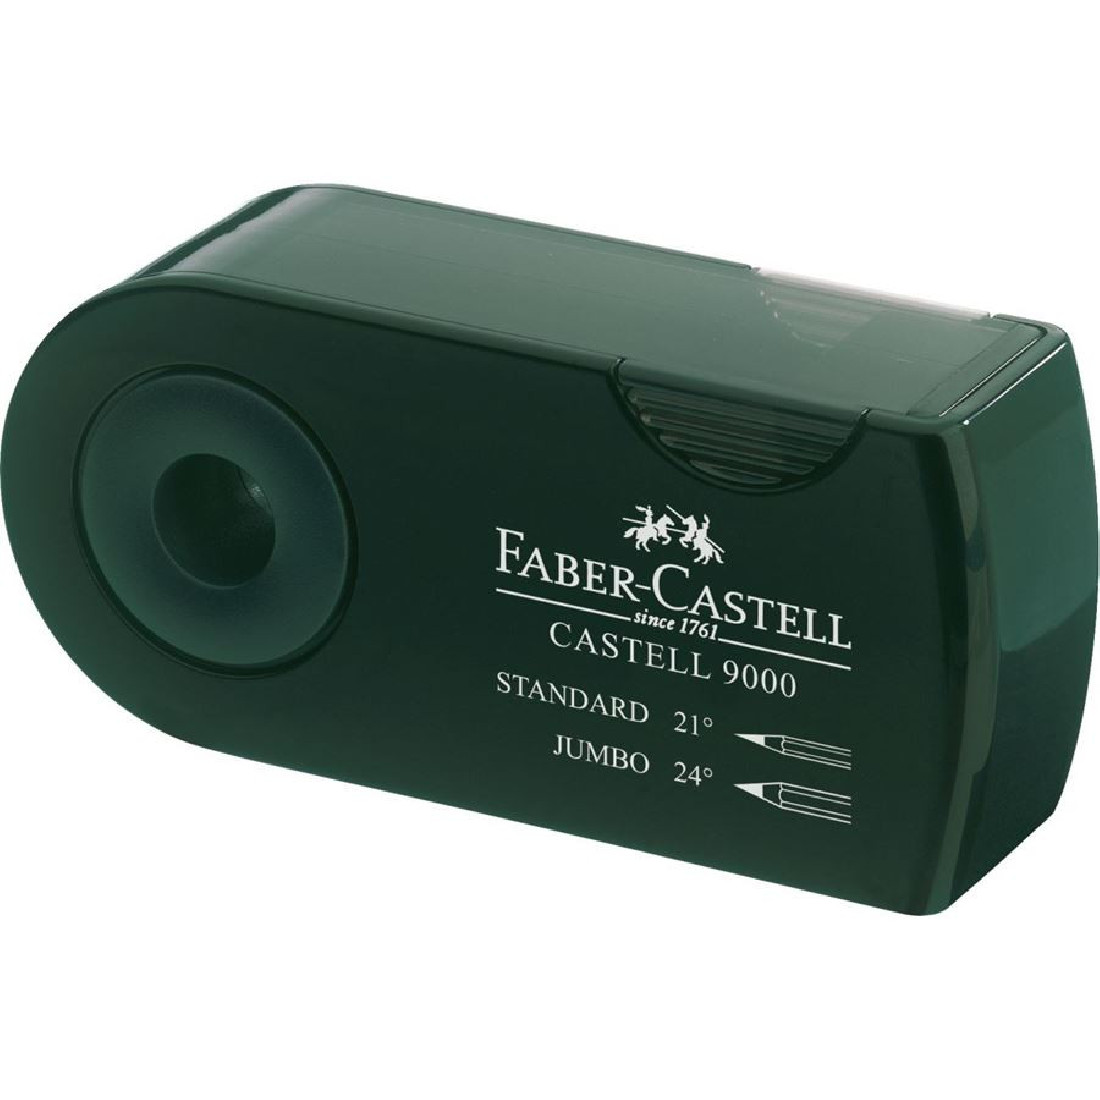 Faber Castell 9000 twin sharpening box 582800